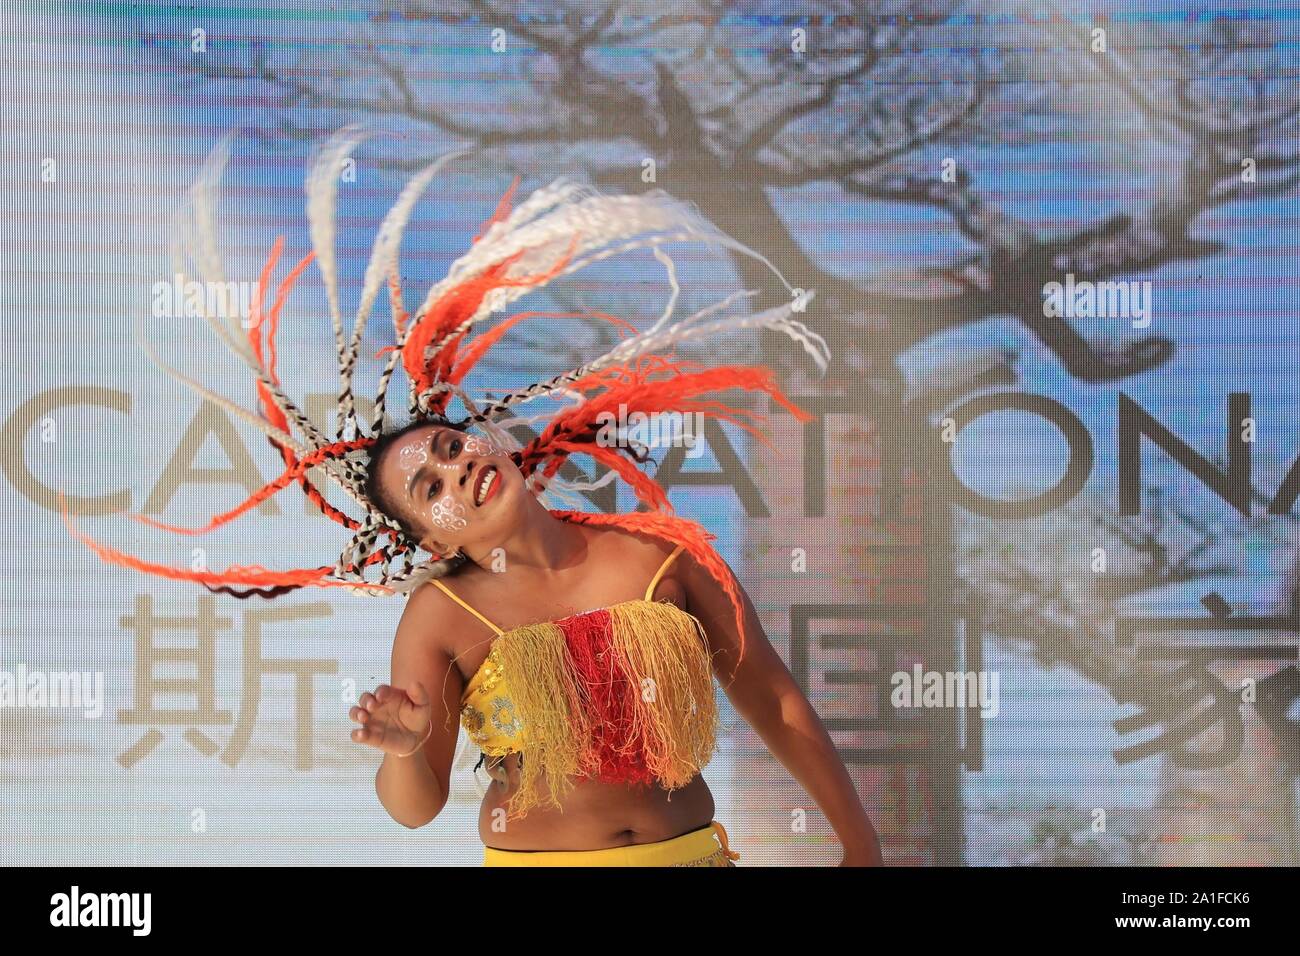 Beijing, China. 26th Sep, 2019. An actress performs during the 'Madagascar Day' event of the Beijing International Horticultural Exhibition in Beijing, capital of China, Sept. 26, 2019. The expo held its 'Madagascar Day' event on Thursday. Credit: Duan Xuefeng/Xinhua Stock Photo